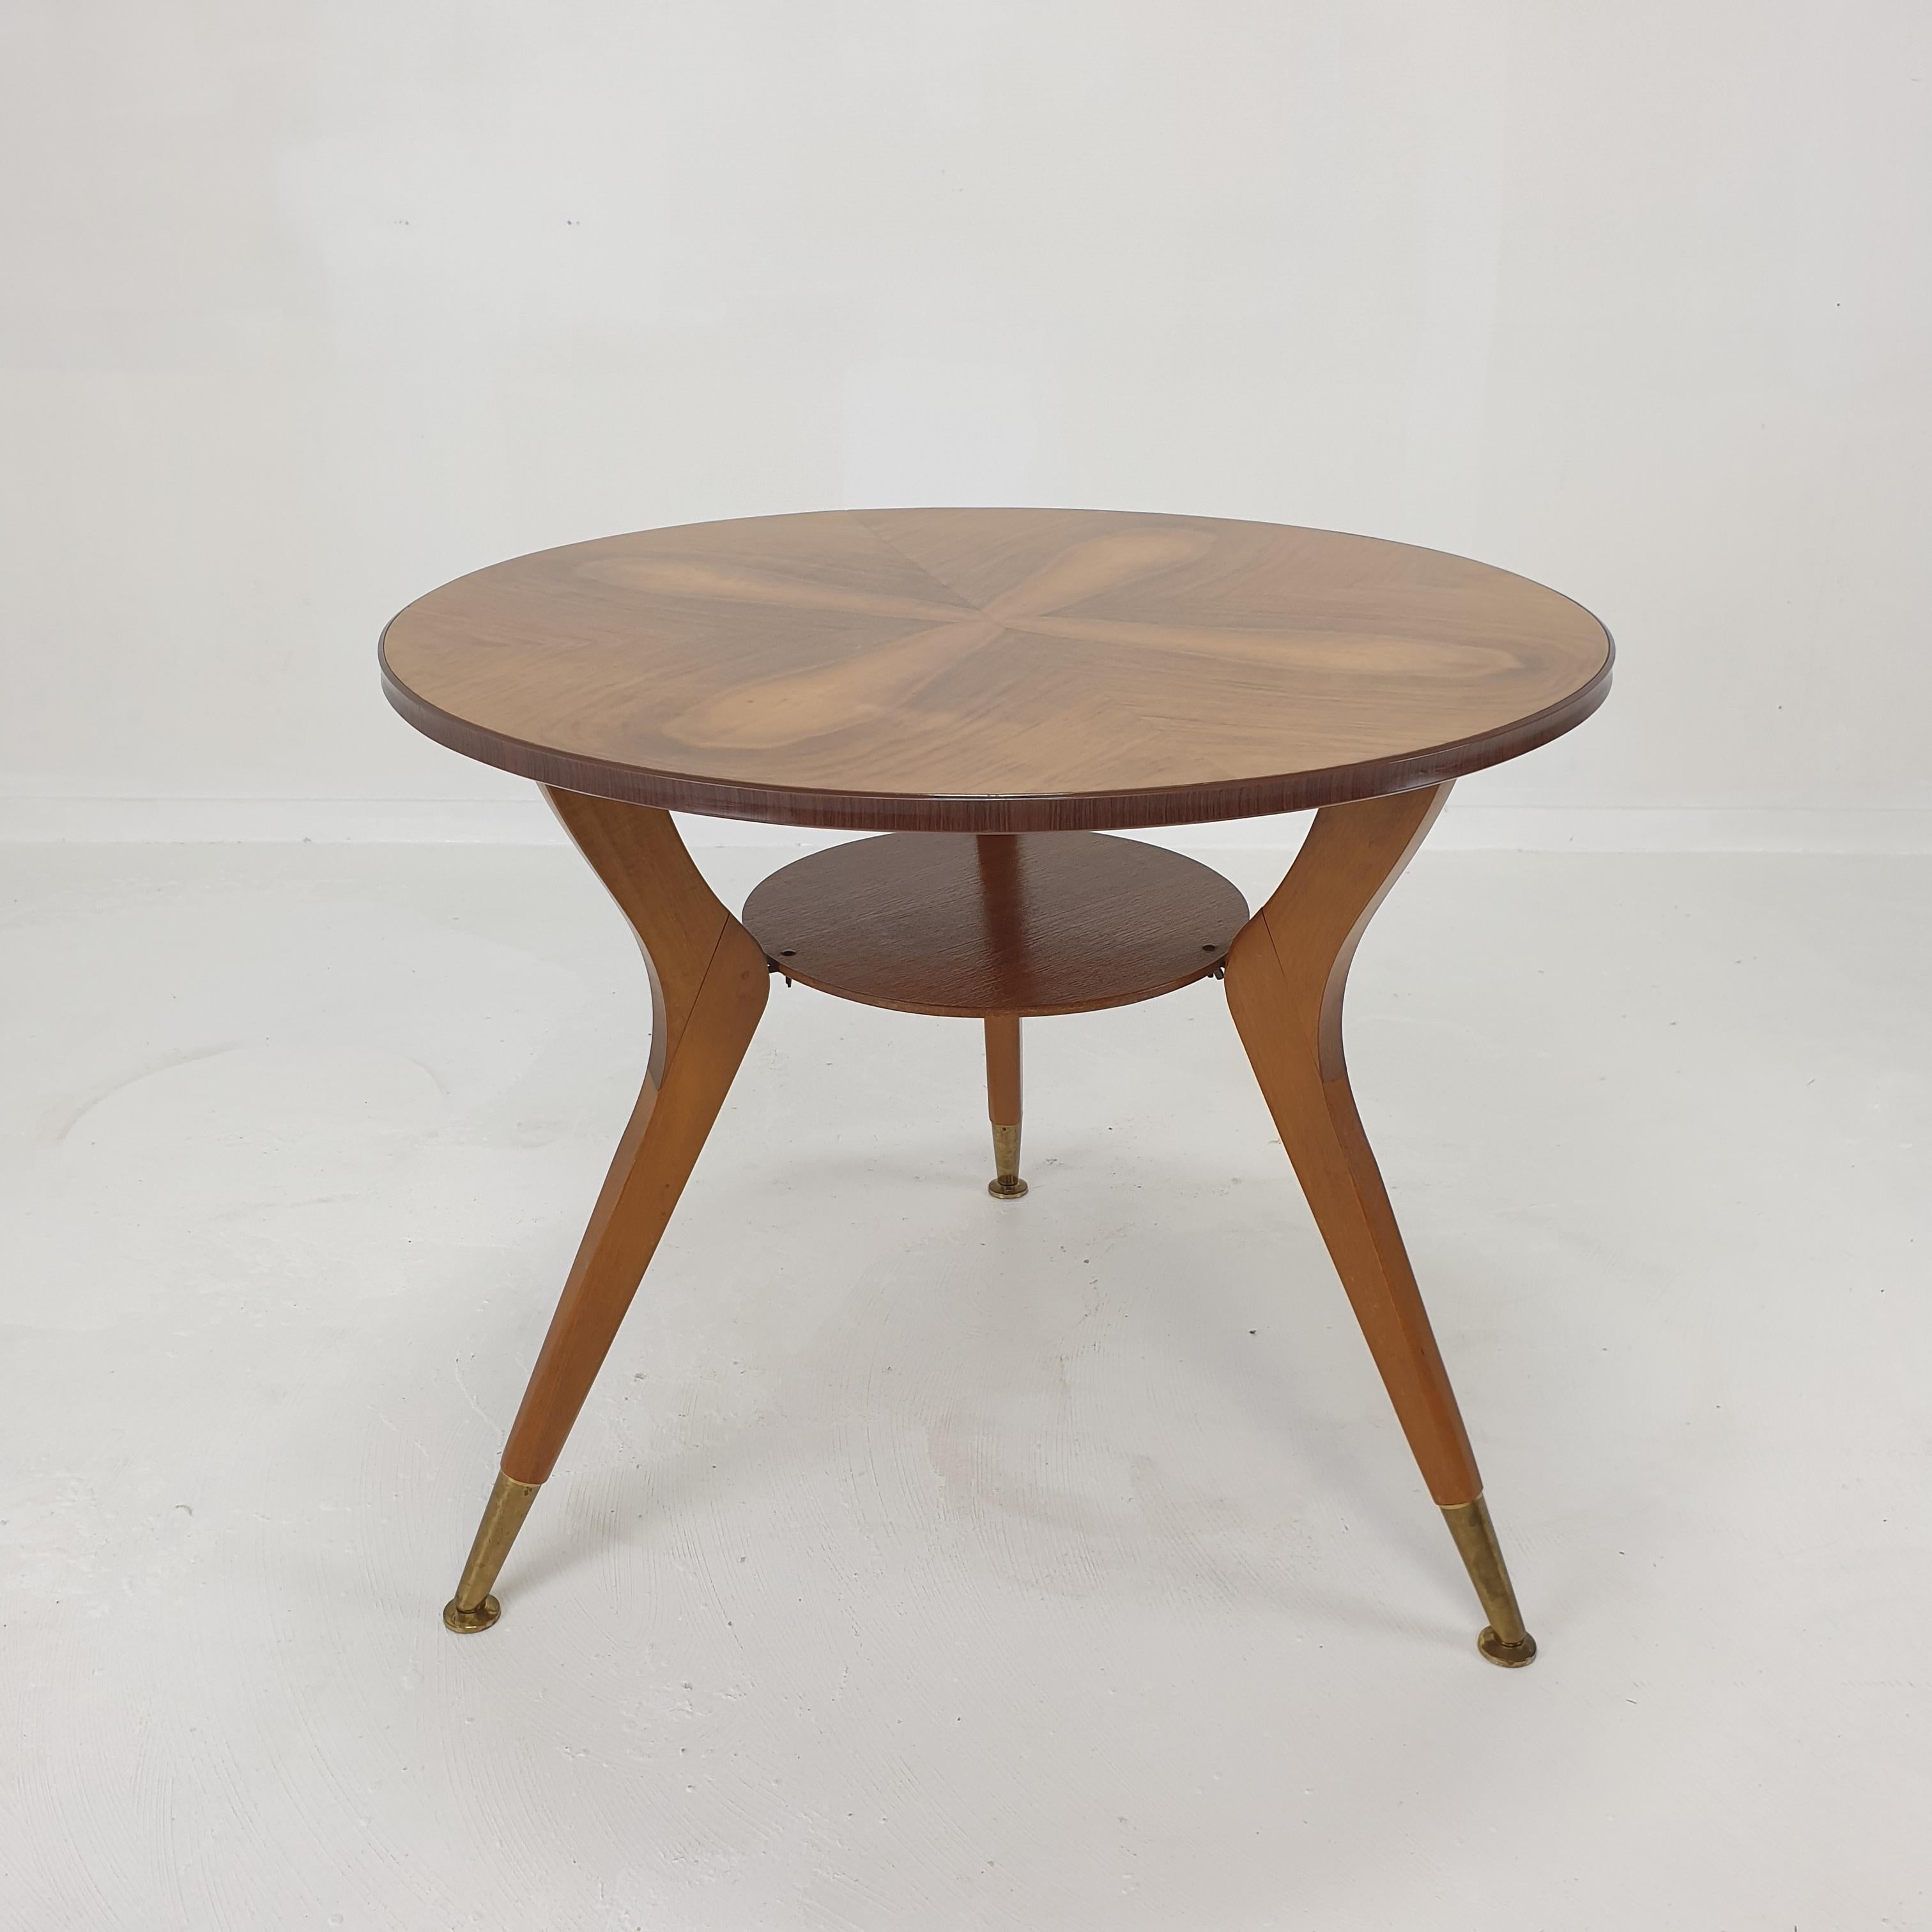 Mid-20th Century Midcentury Italian Wooden Coffee or Side Table with Brass Feet, 1960s For Sale